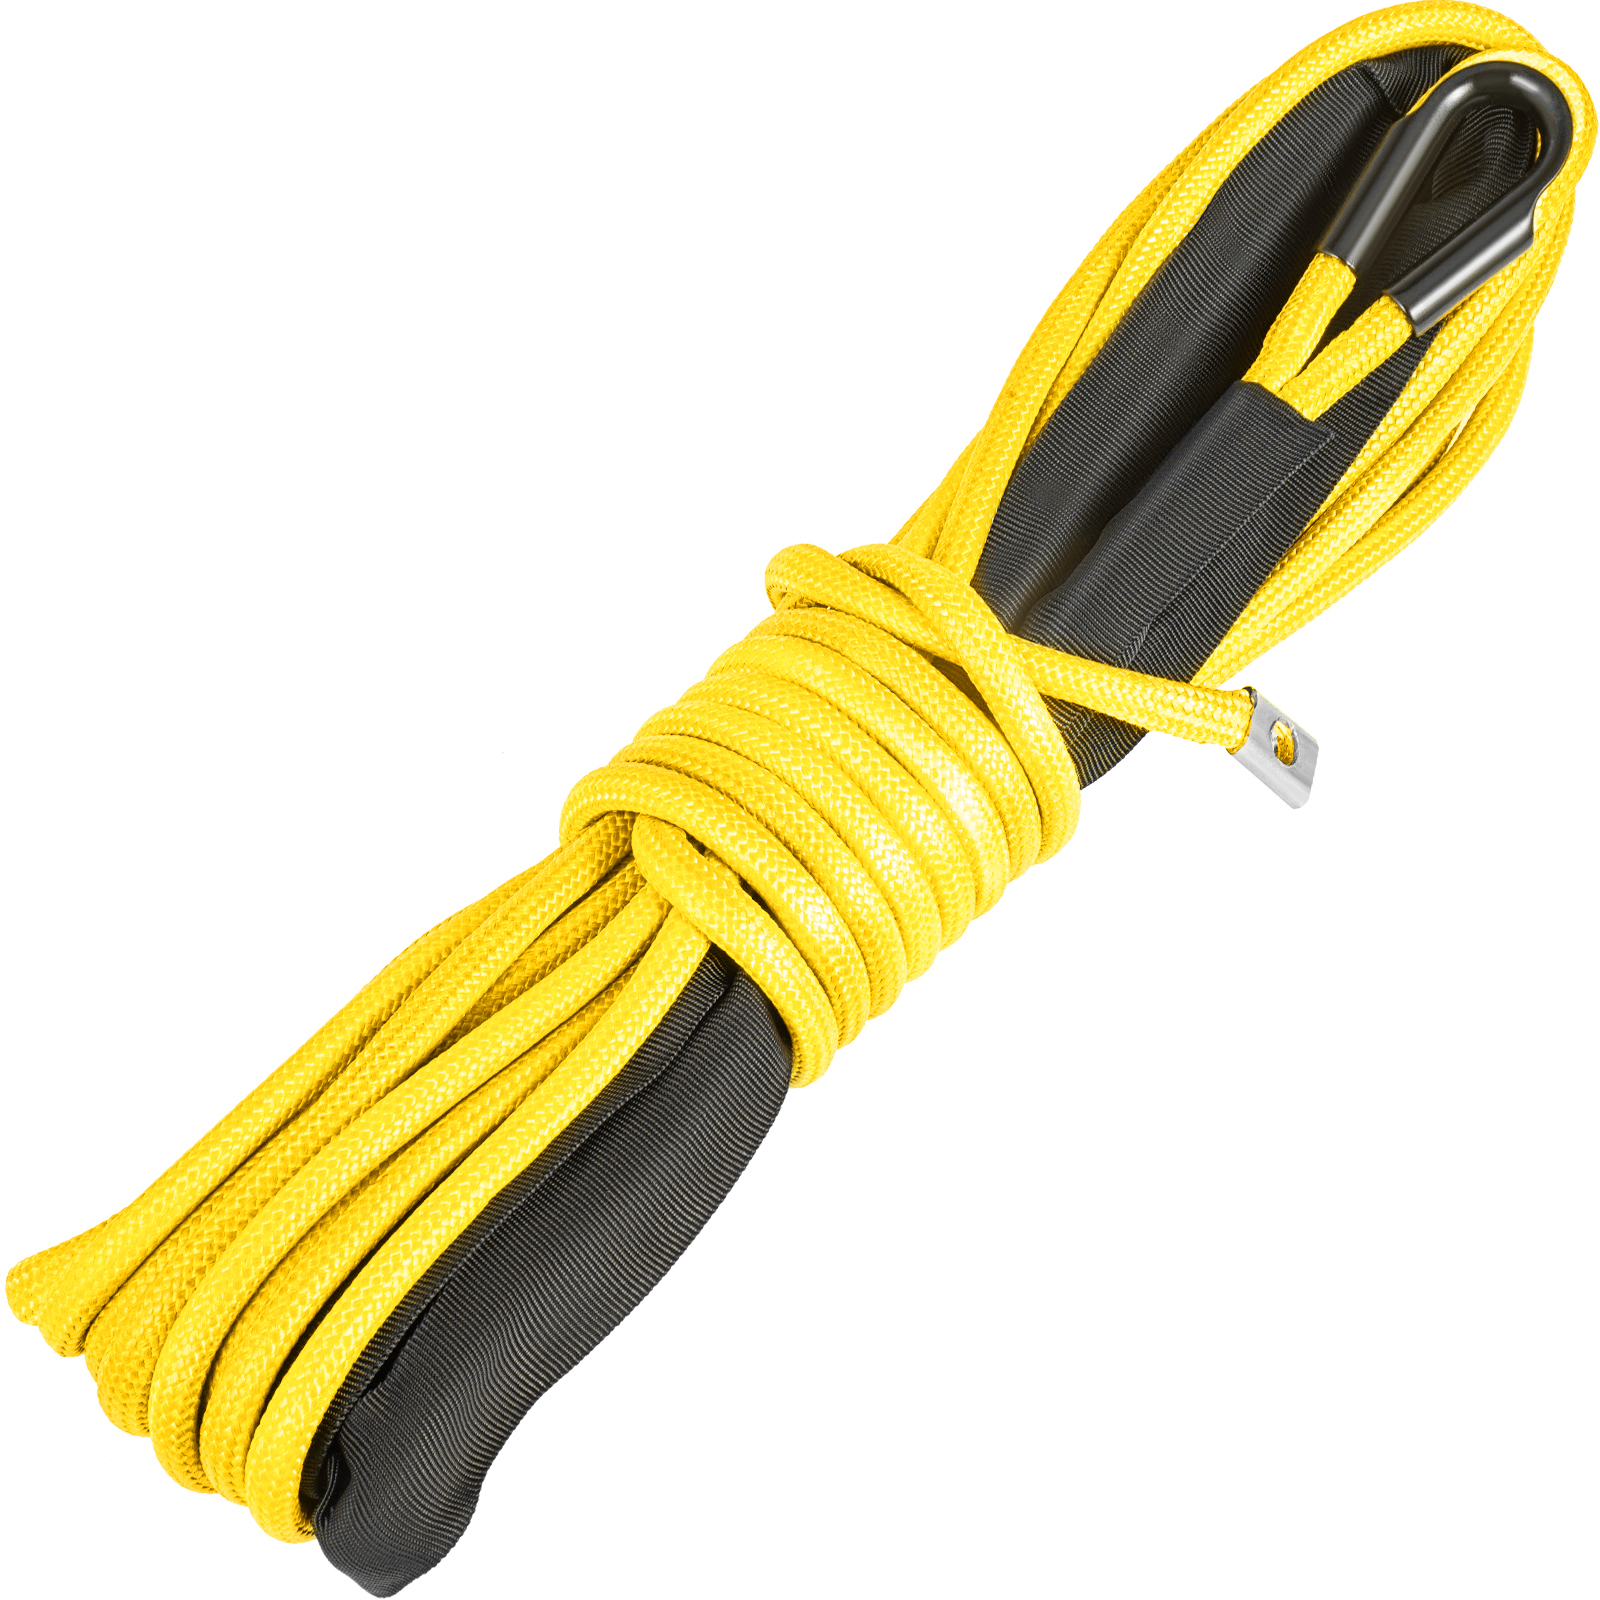 Vevor Winch Rope Synthetic Cable 5/16"x50' 8000 Lbs Capacity Atv Recovery Yellow от Vevor Many GEOs